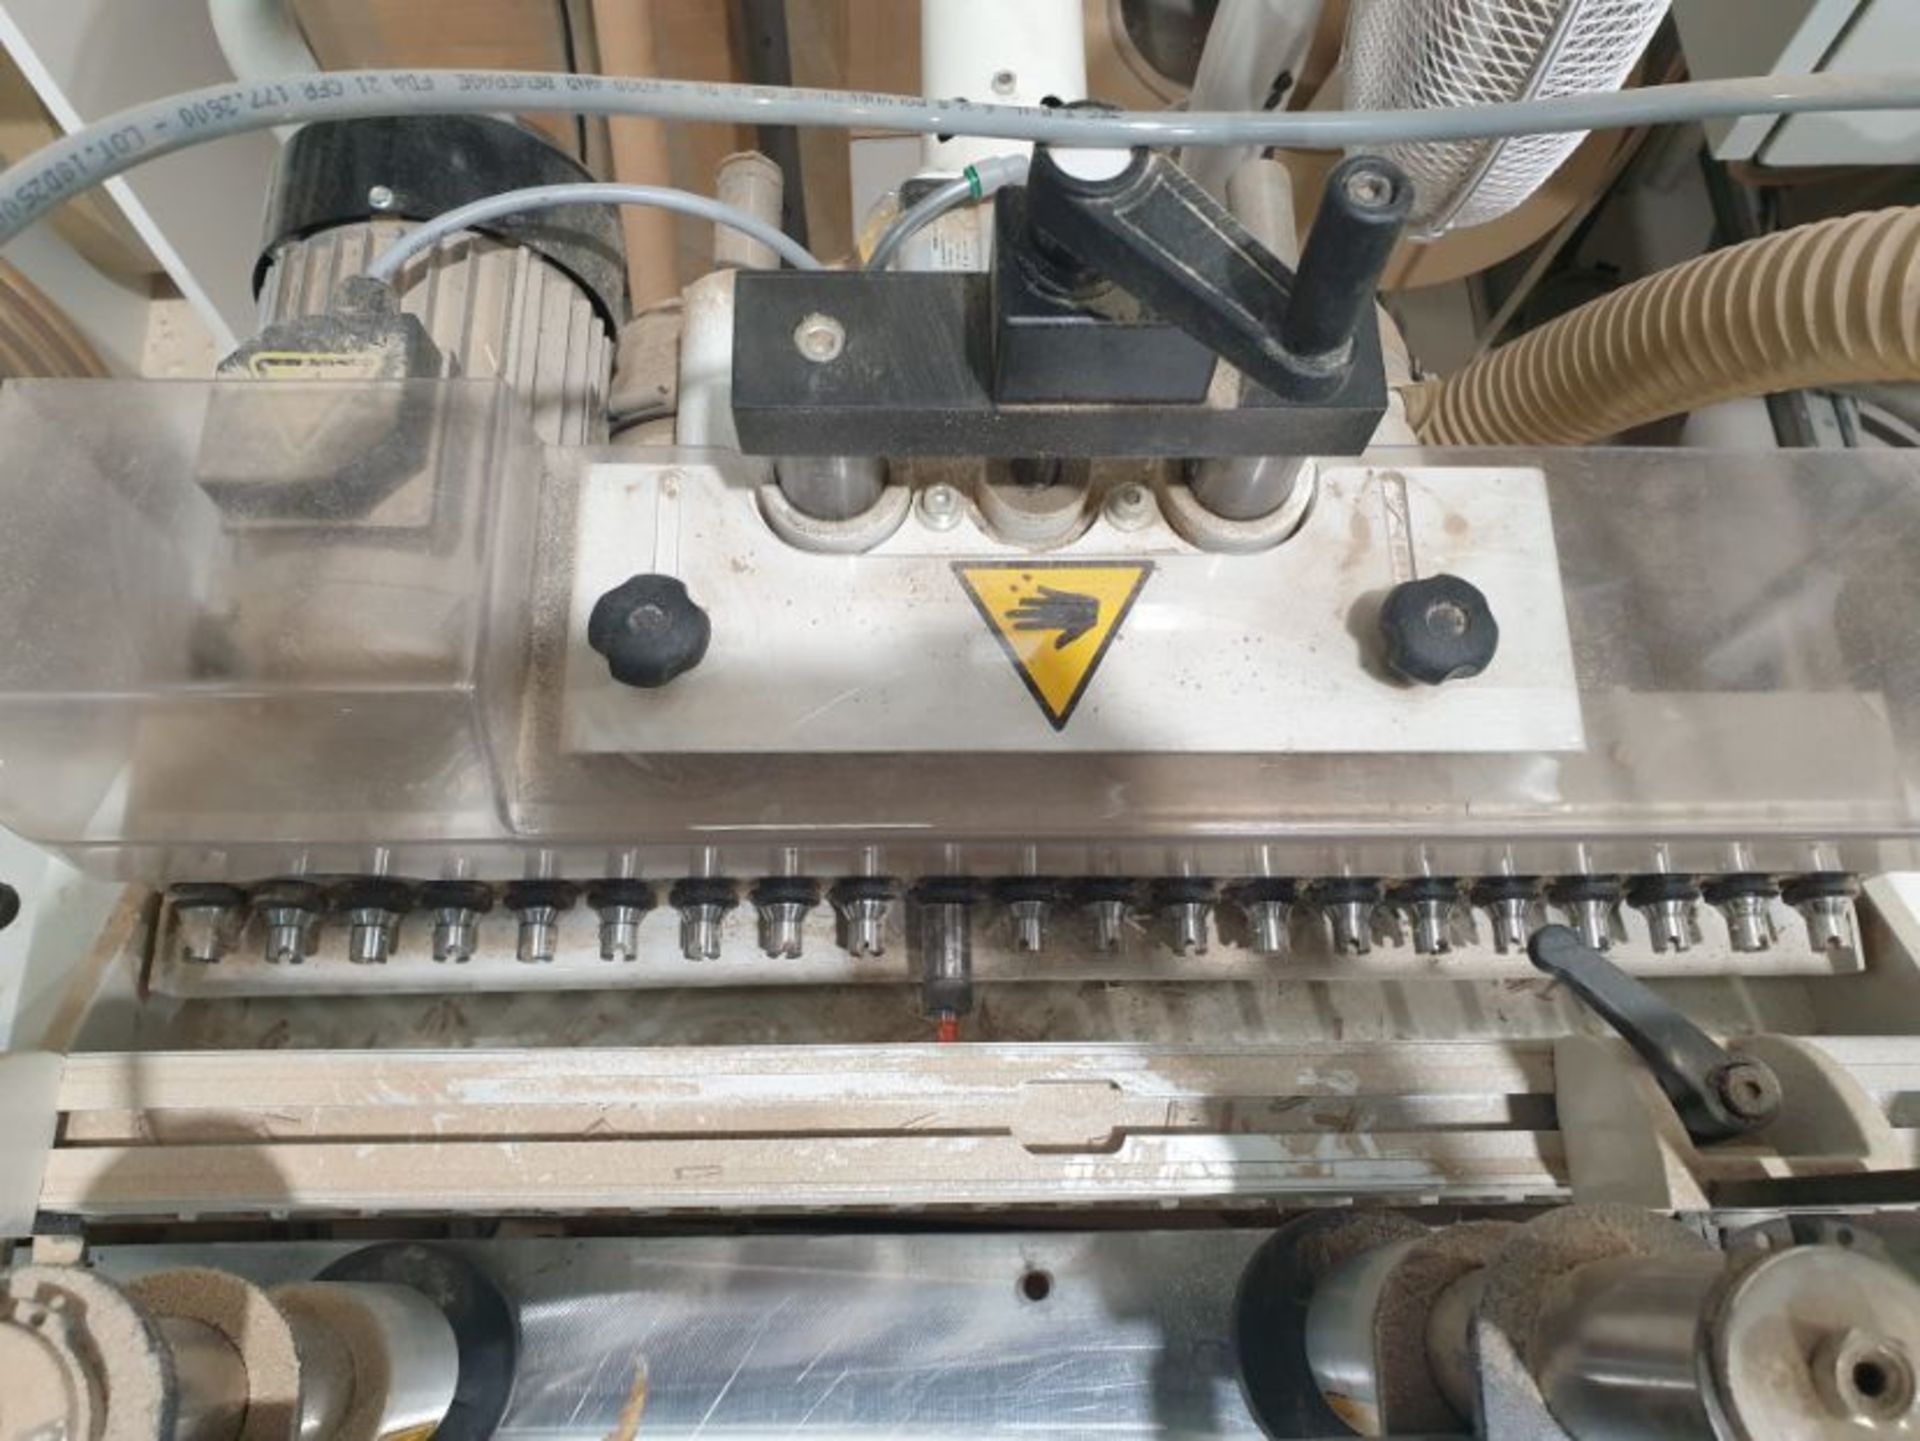 SCM Minimax AD21 Drilling Machine, Serial No. KK00003301, Year of Manufacture 2019, 21 spindle Panel - Image 4 of 4